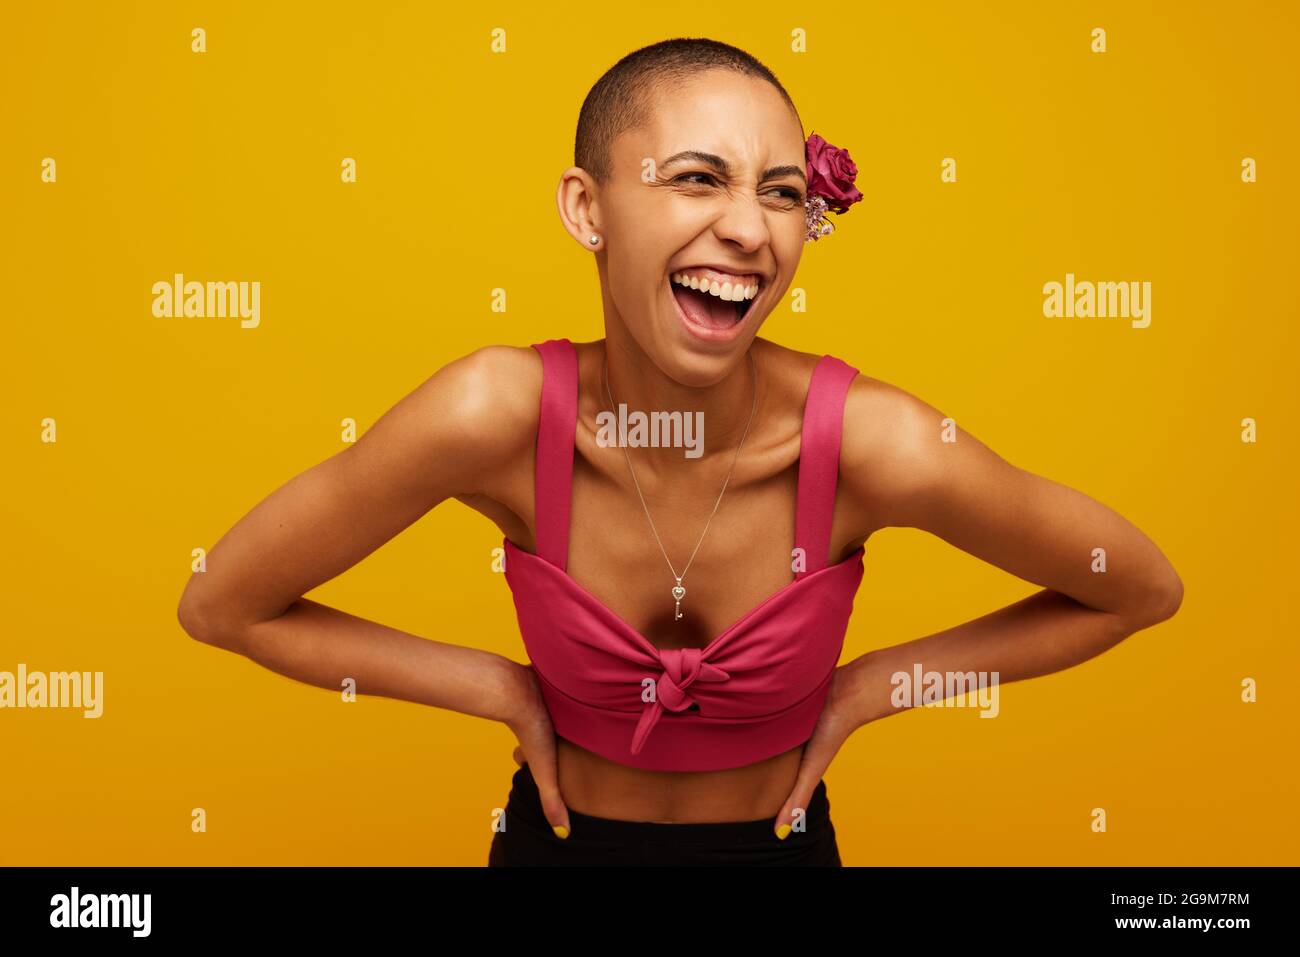 Woman in stylish outfit on yellow background. Model standing with hands on waist looking away and laughing. Stock Photo